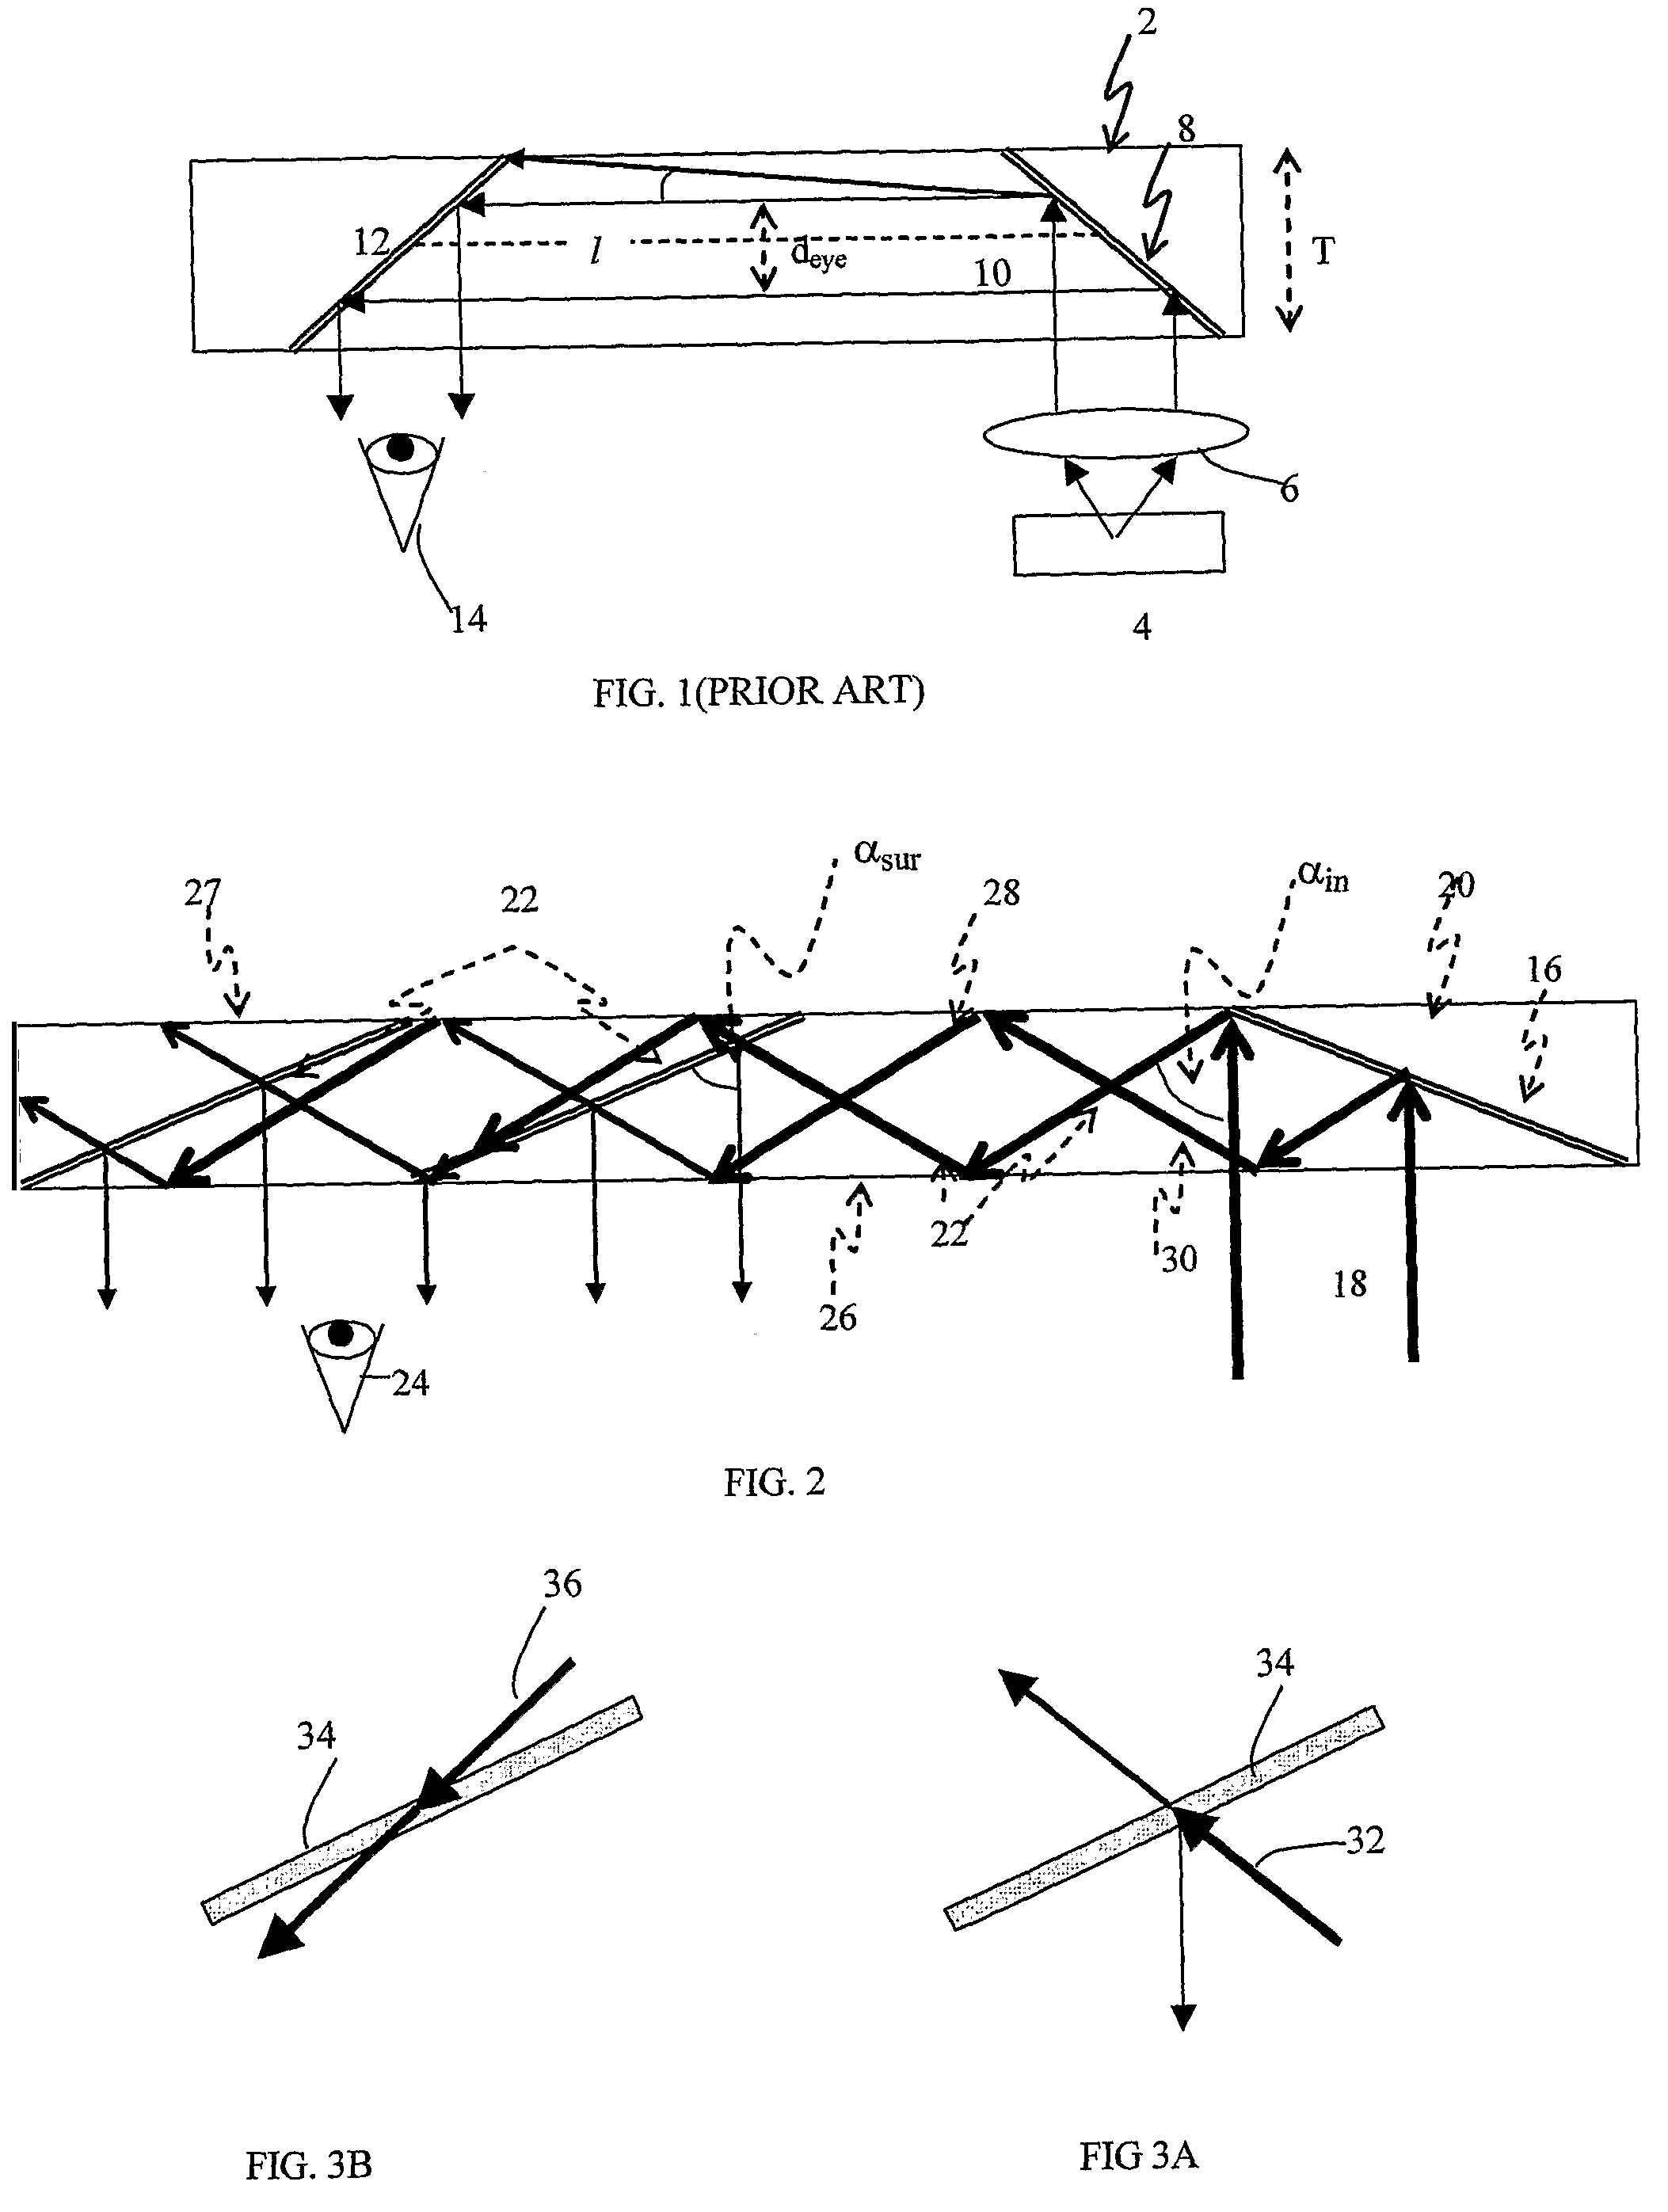 Substrate-guided optical device utilizing thin transparent layer